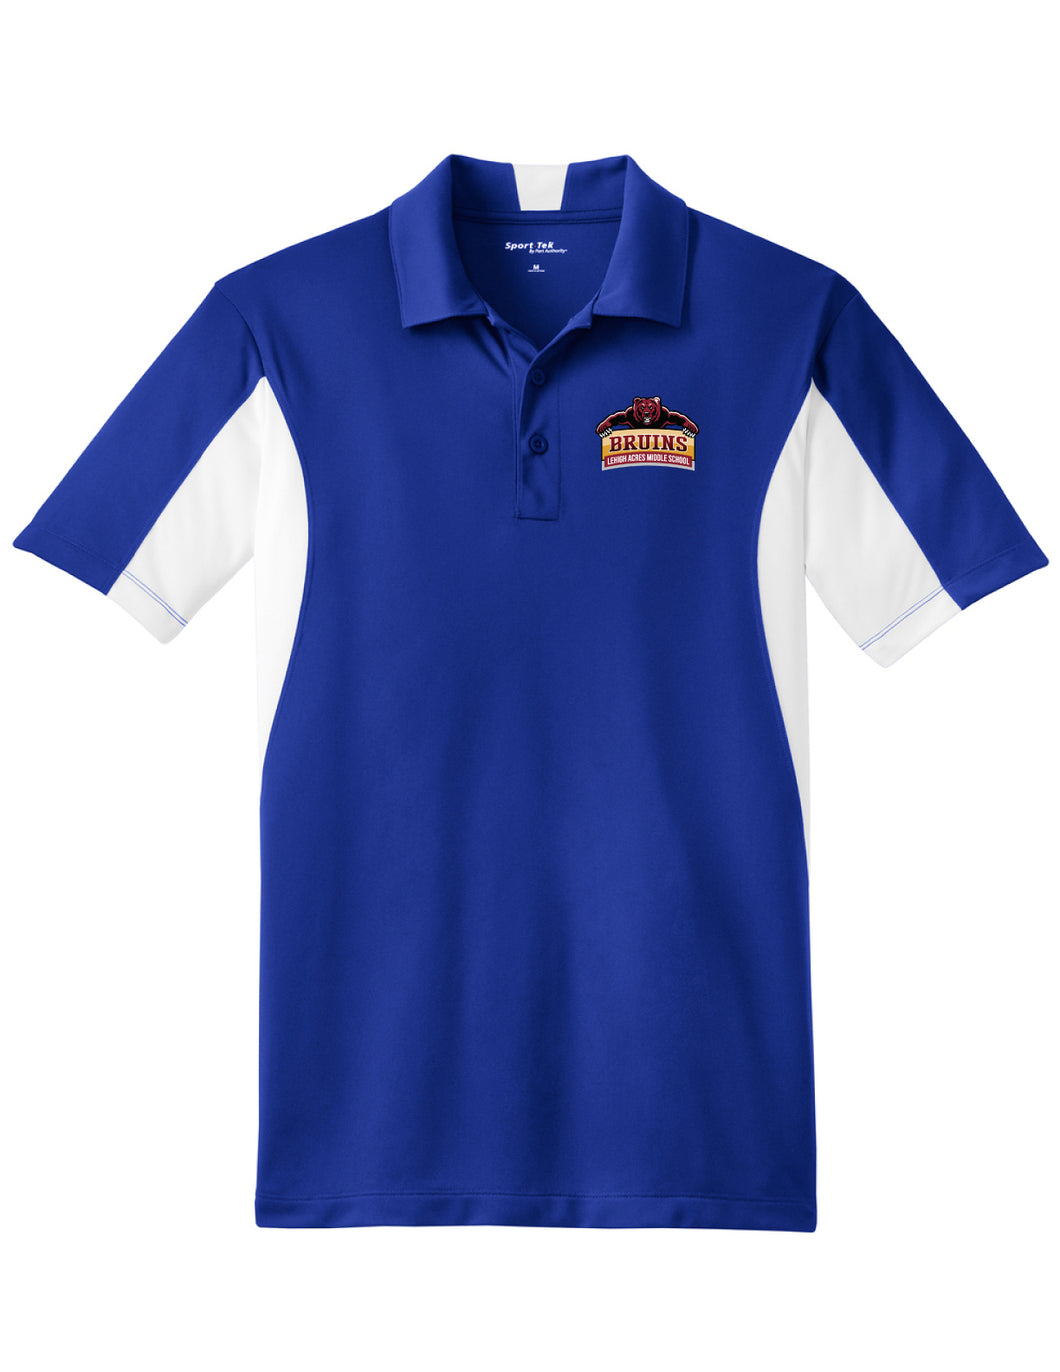 Polo Shirt Blue with White Trim (Unisex Adult Cut)